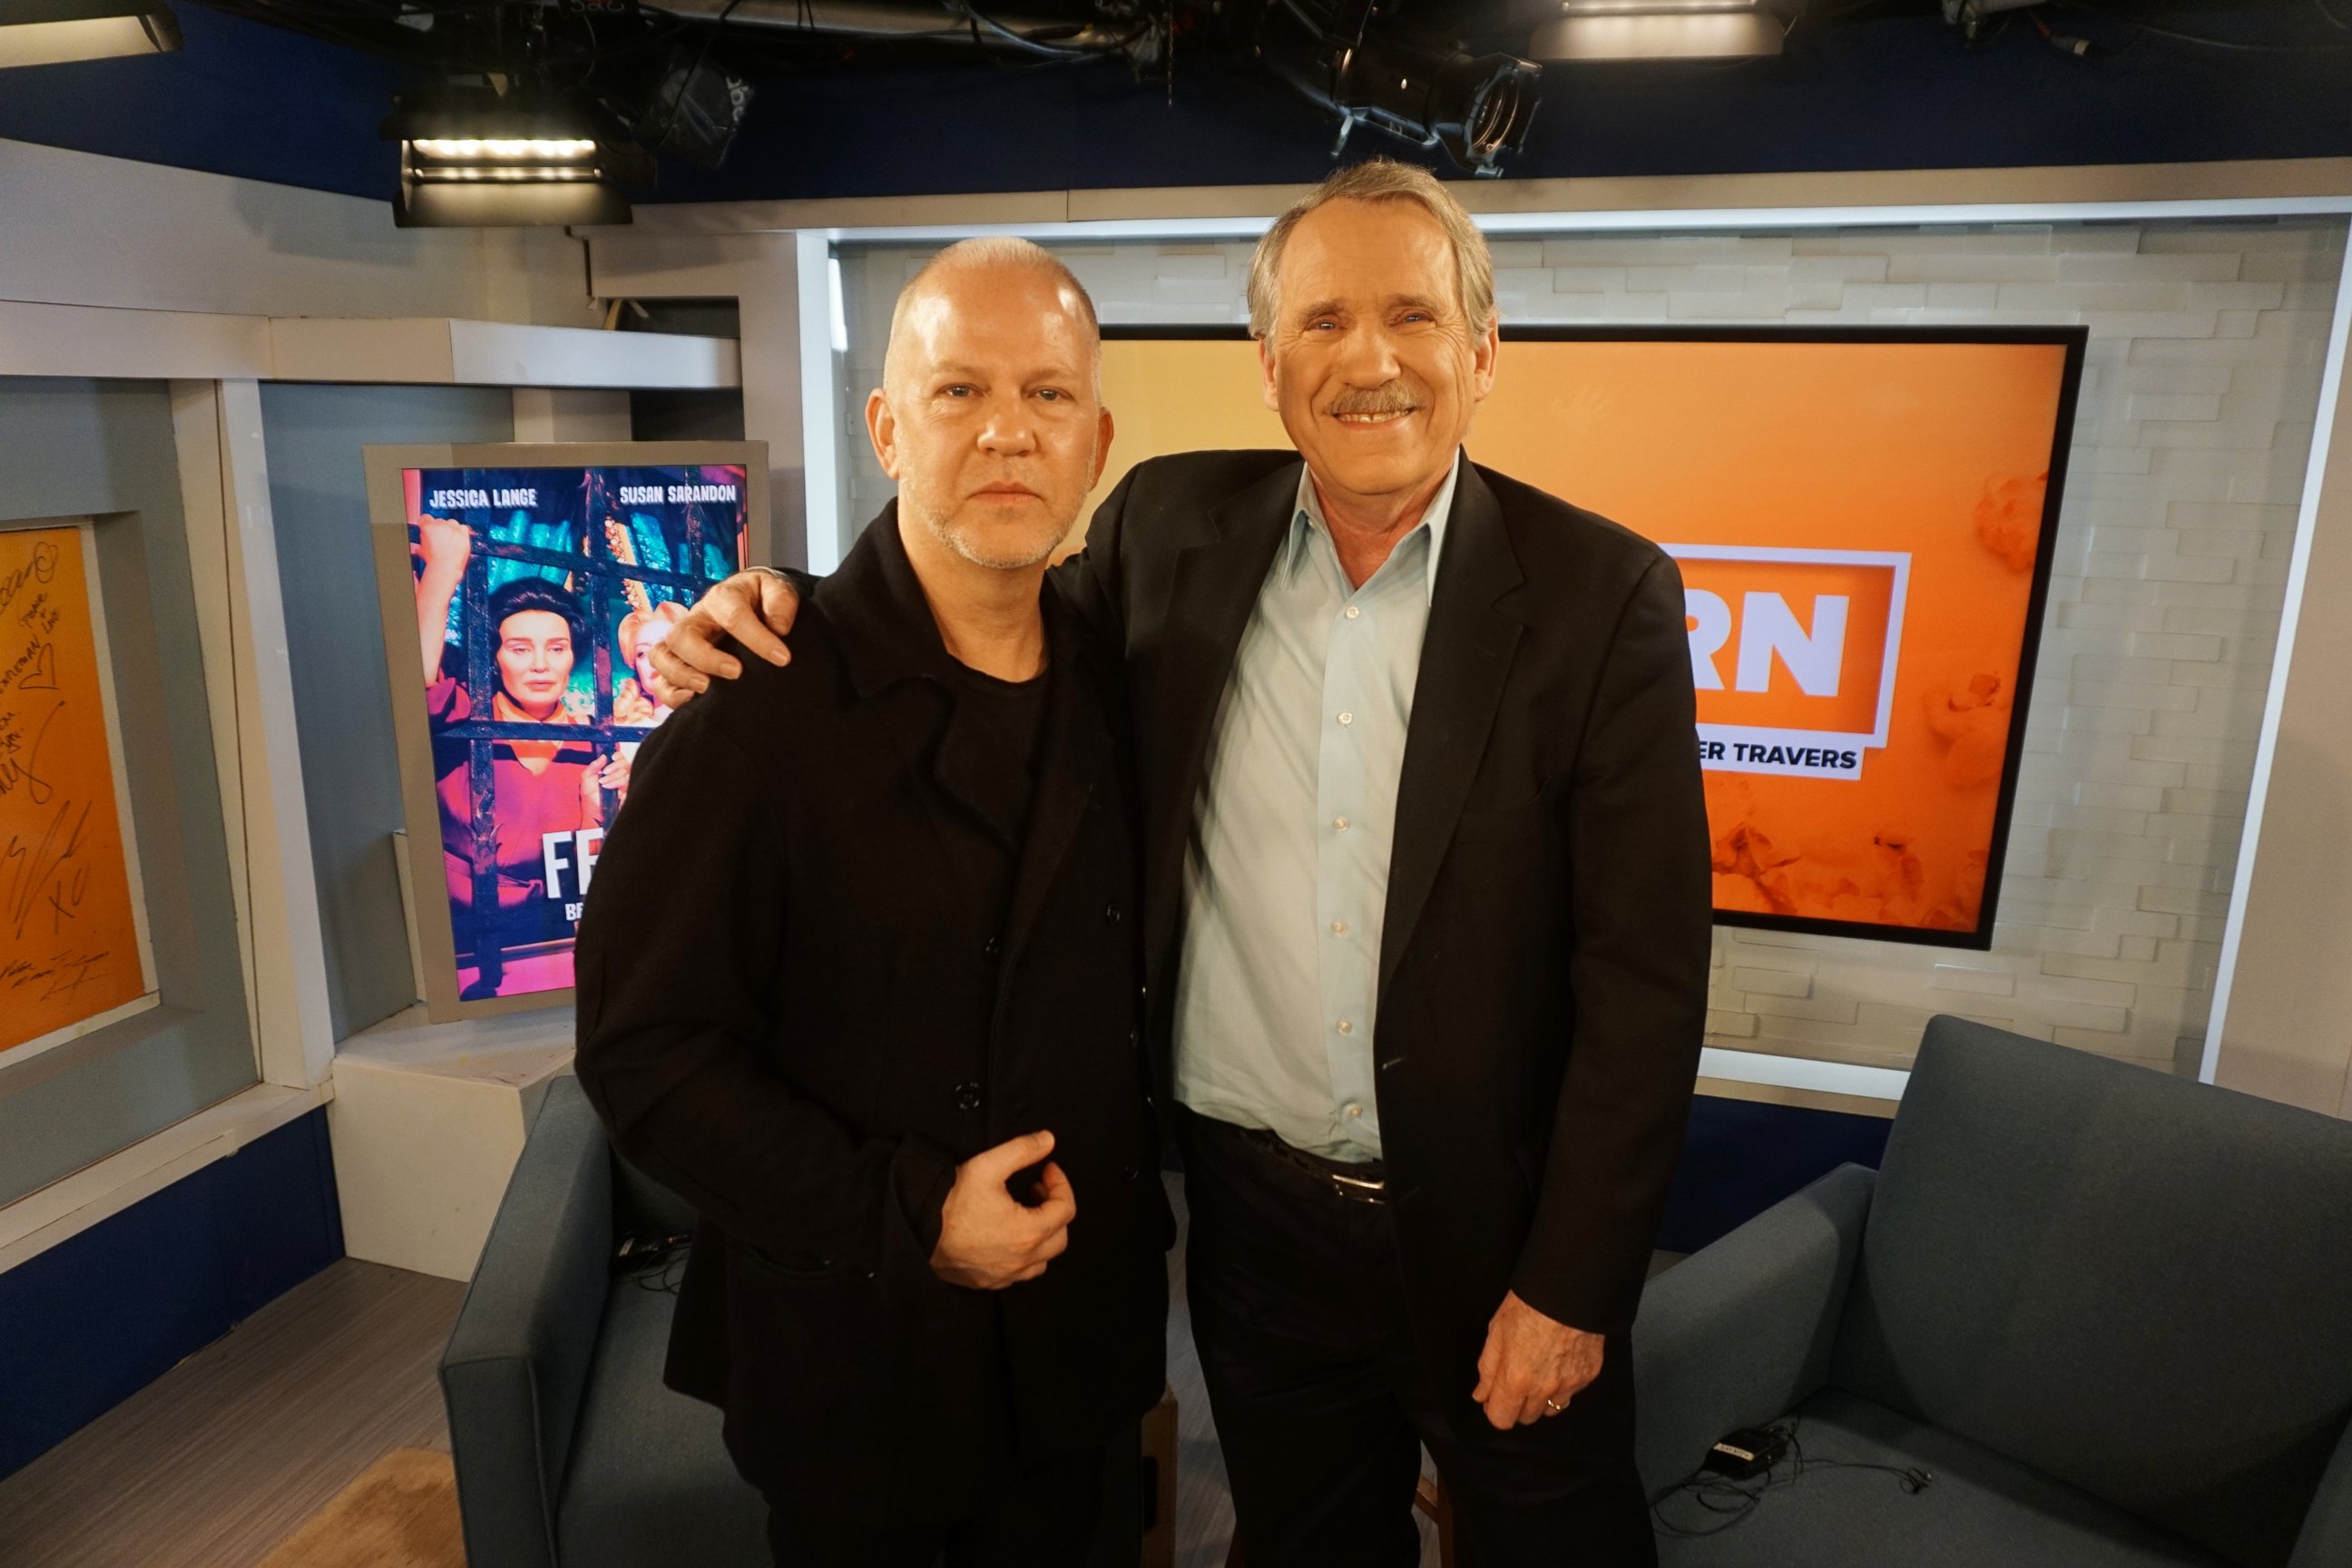 PHOTO: Ryan Murphy and Peter Travers at the ABC News Studios in N.Y., Feb. 13, 2017.